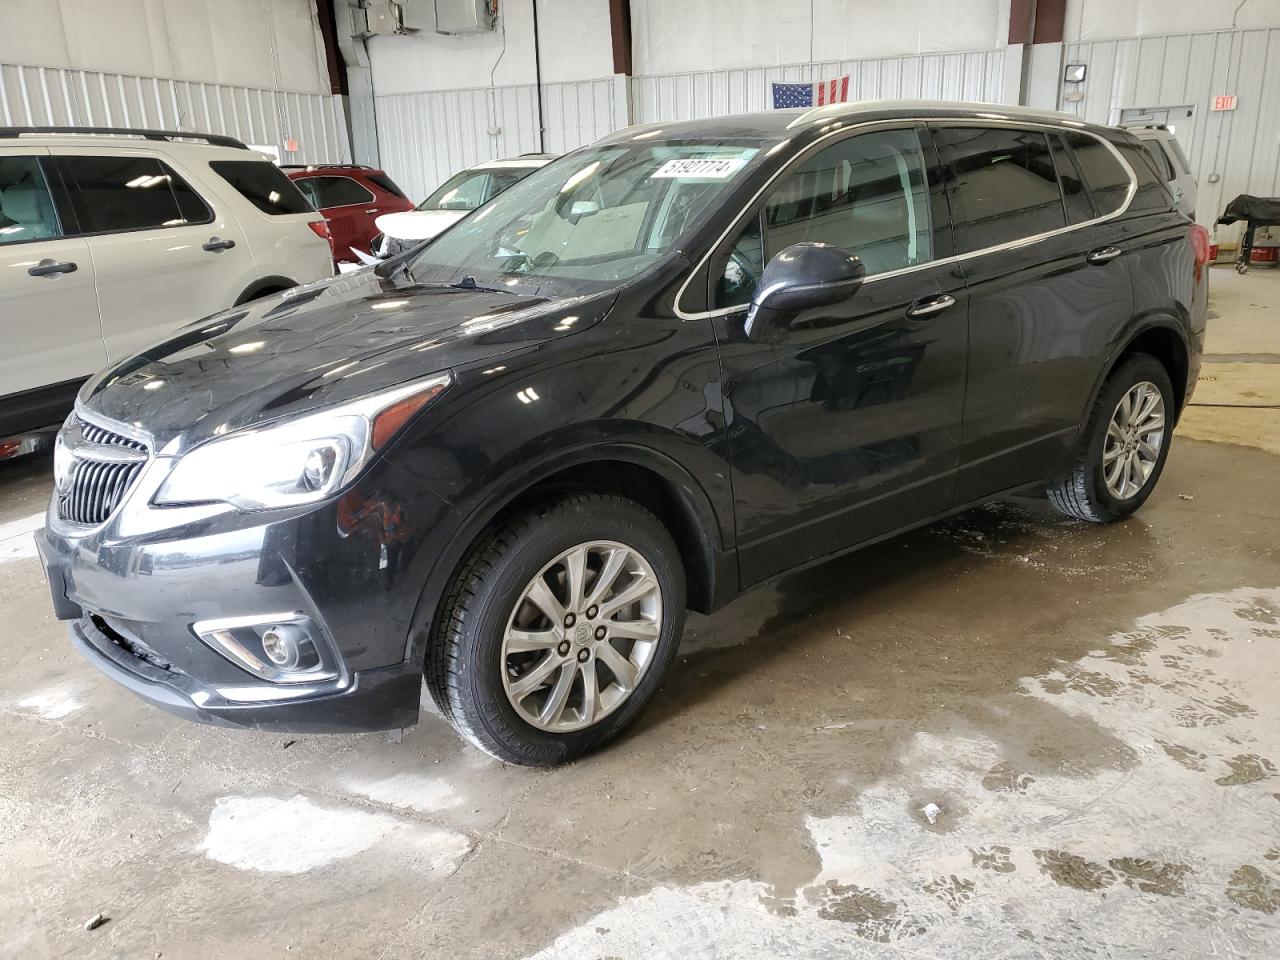 vin: LRBFX2SA0KD007662 LRBFX2SA0KD007662 2019 buick envision 2500 for Sale in 53132, Wi - Milwaukee South, Franklin, Wisconsin, USA